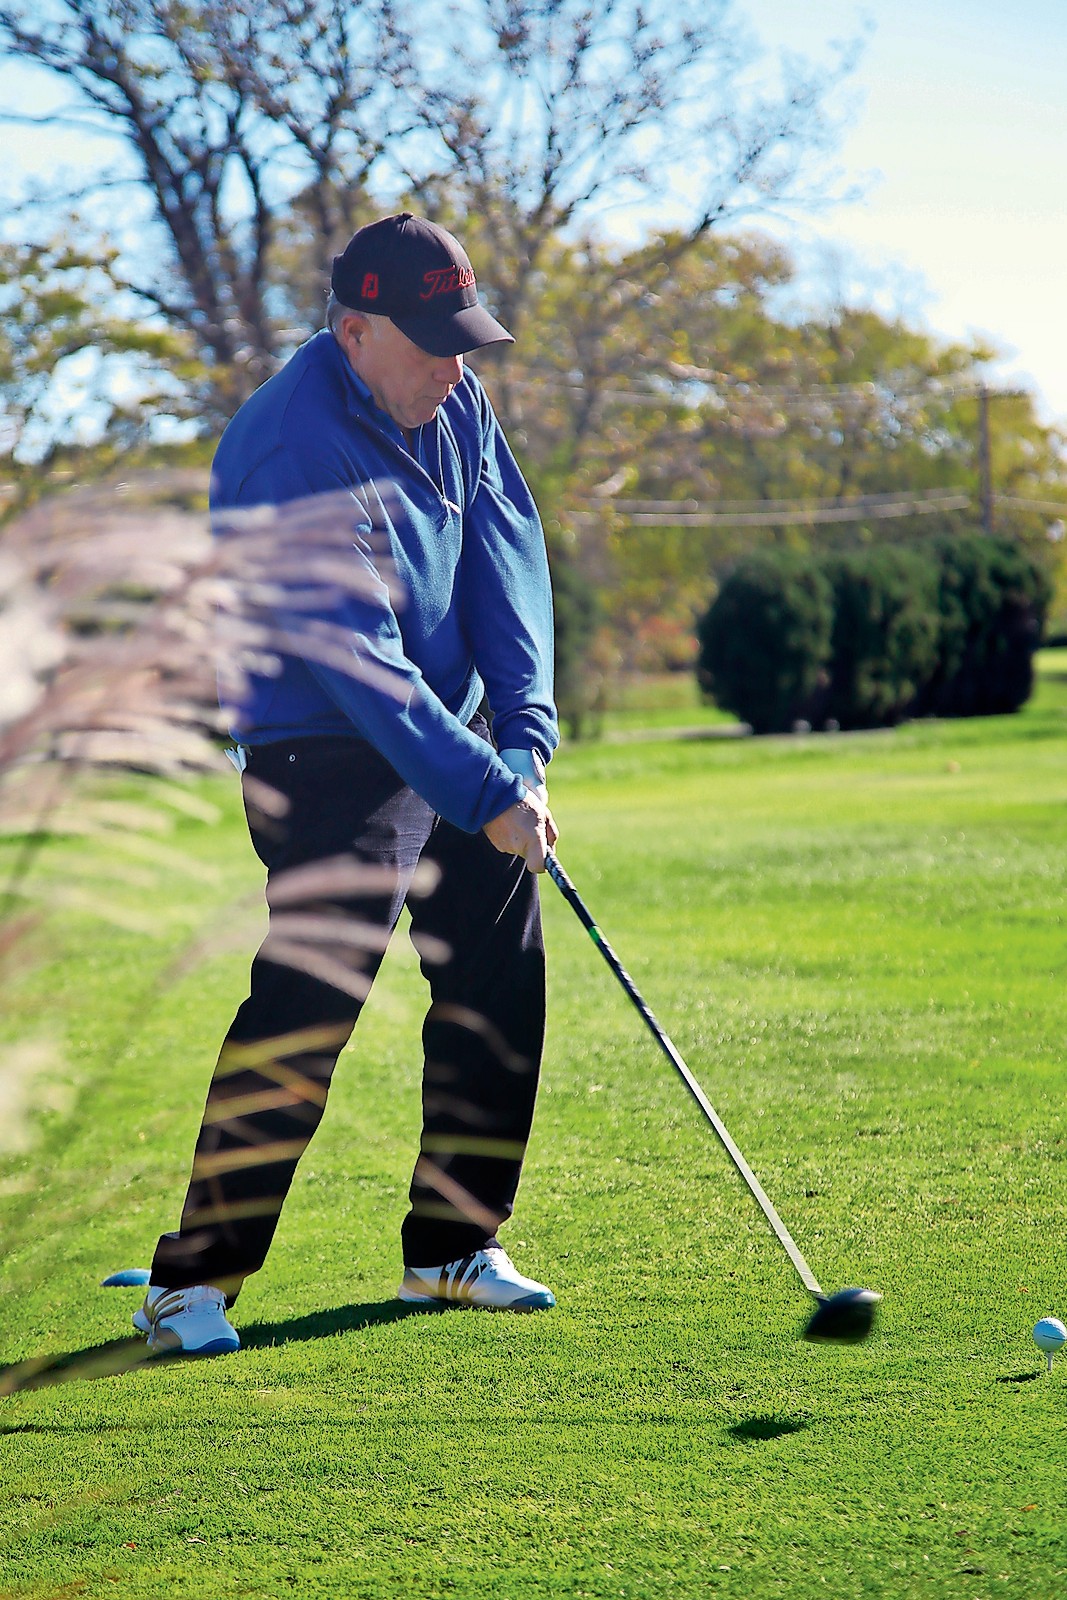 Lawrence team member Randy Green teed off at the first hole of the Long Island Village men’s golf championship at the Lawrence Yacht & Country Club.